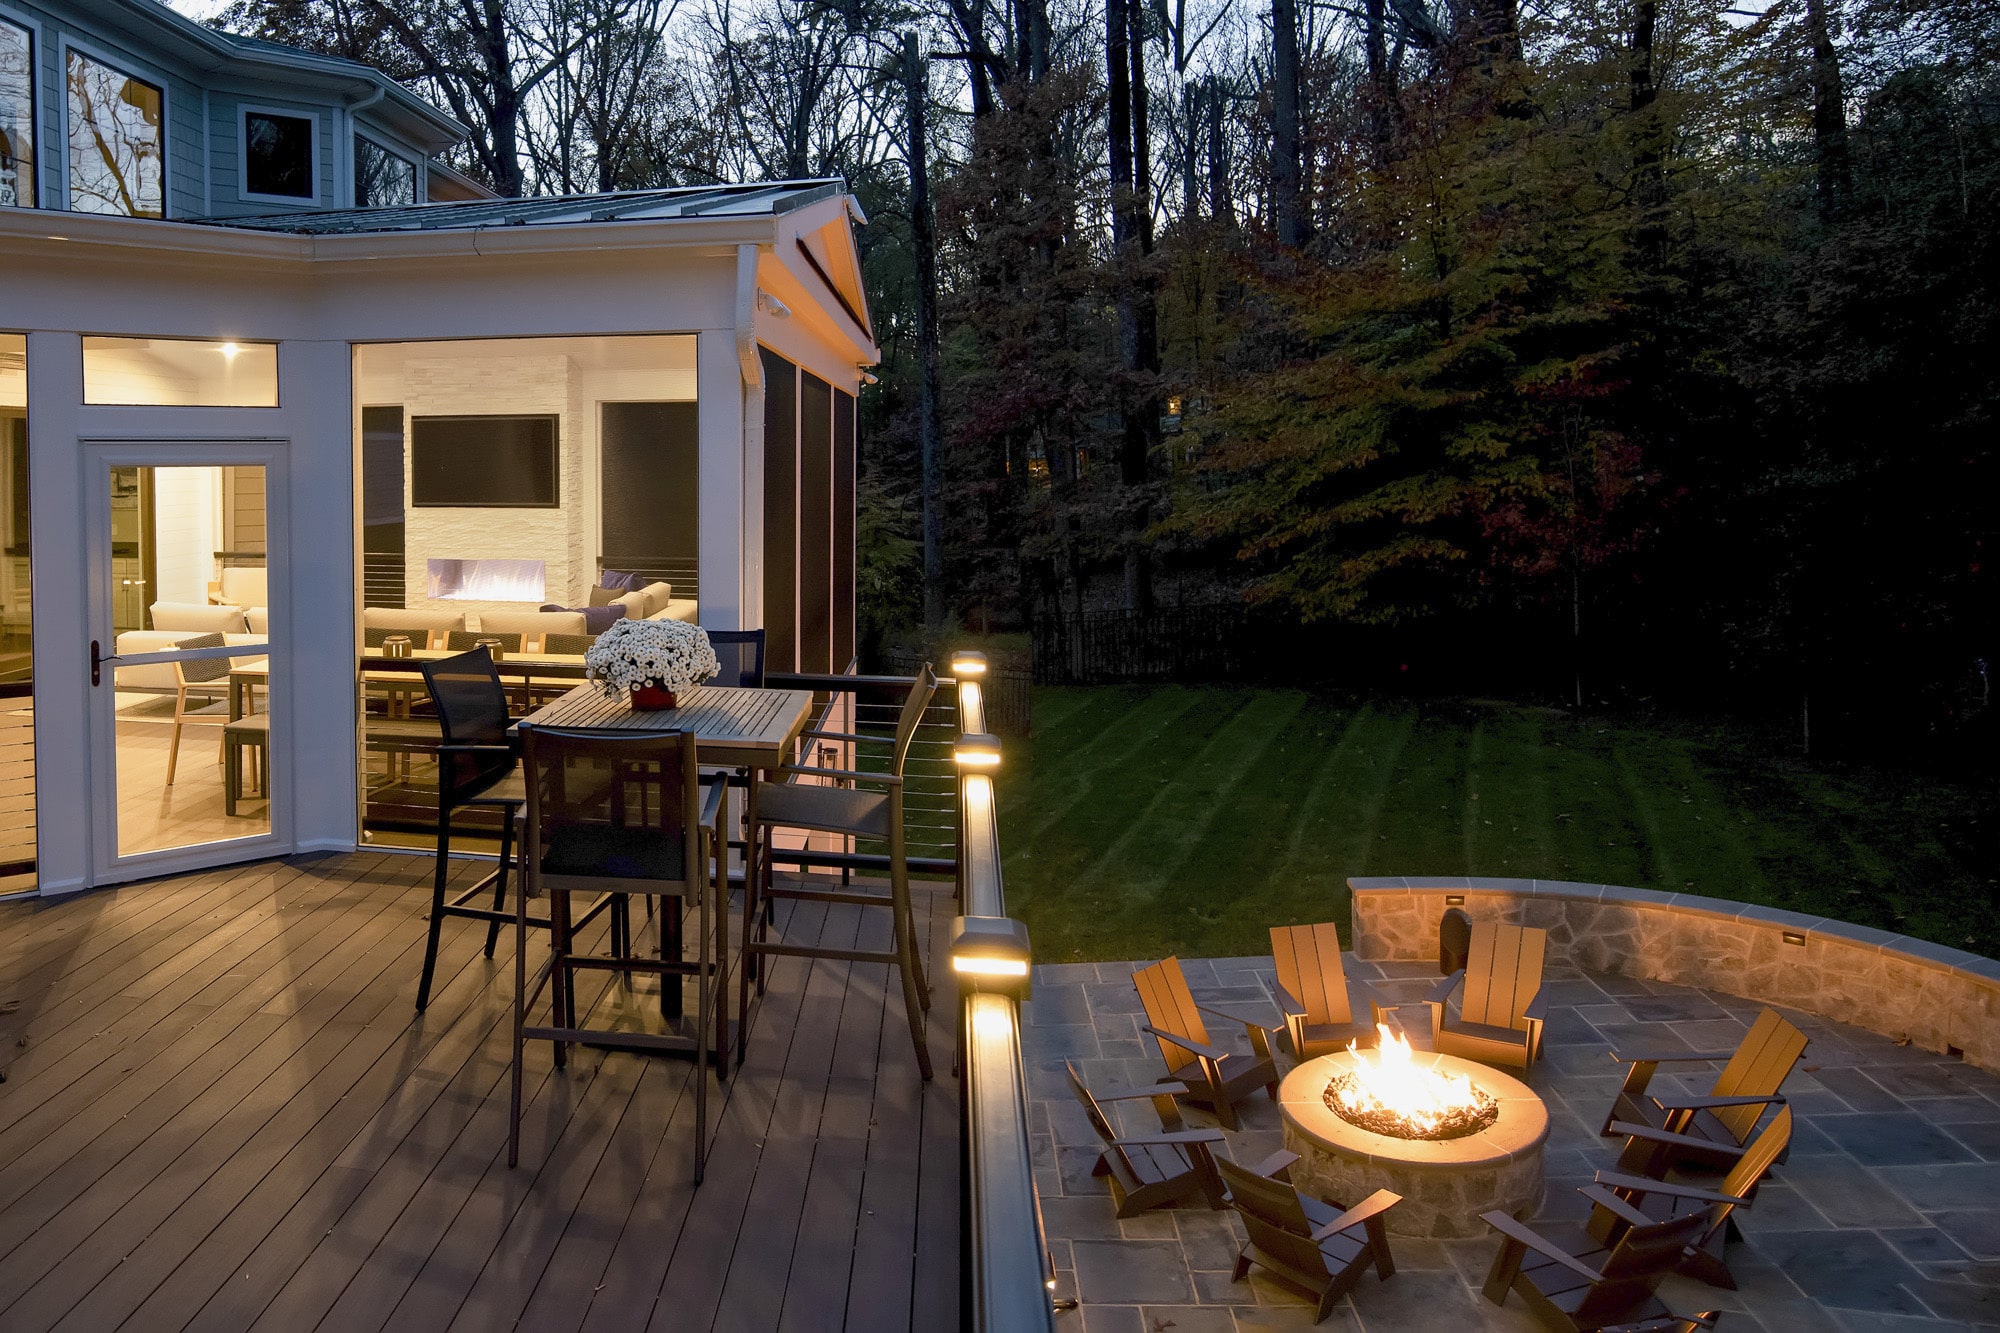 Deck and Patio Renovation in Leesburg